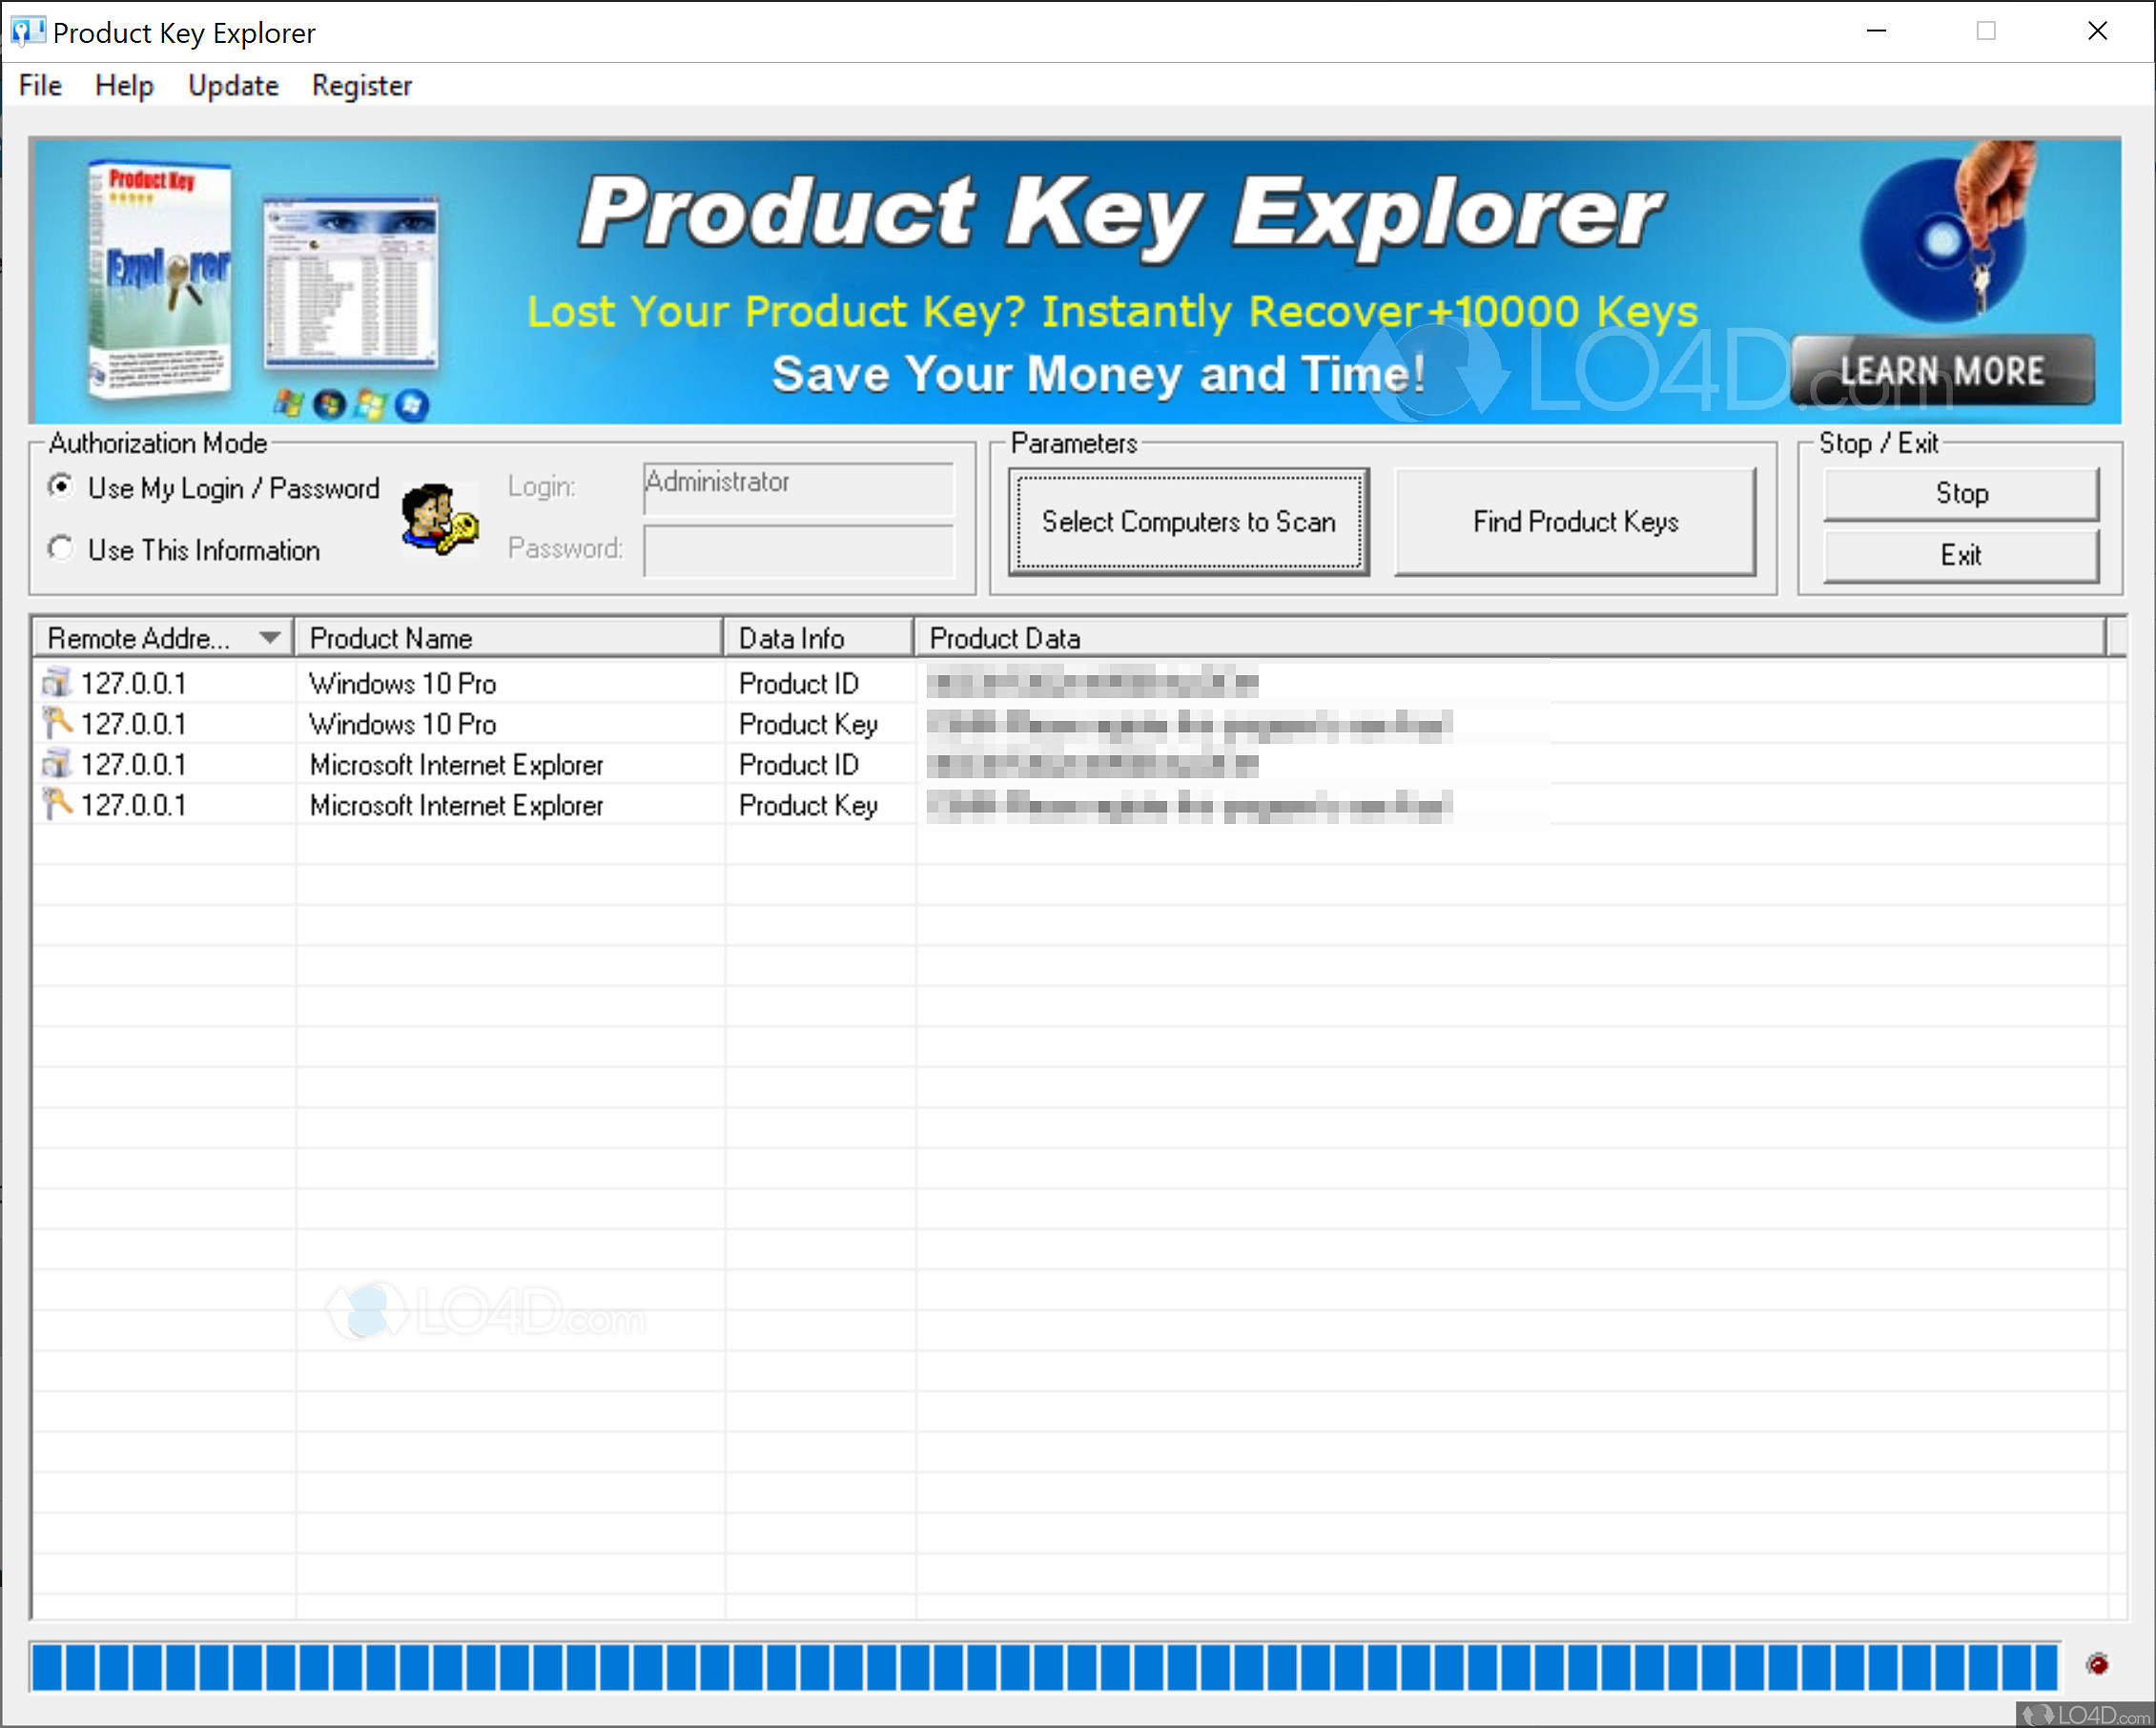 screenrecycler product key